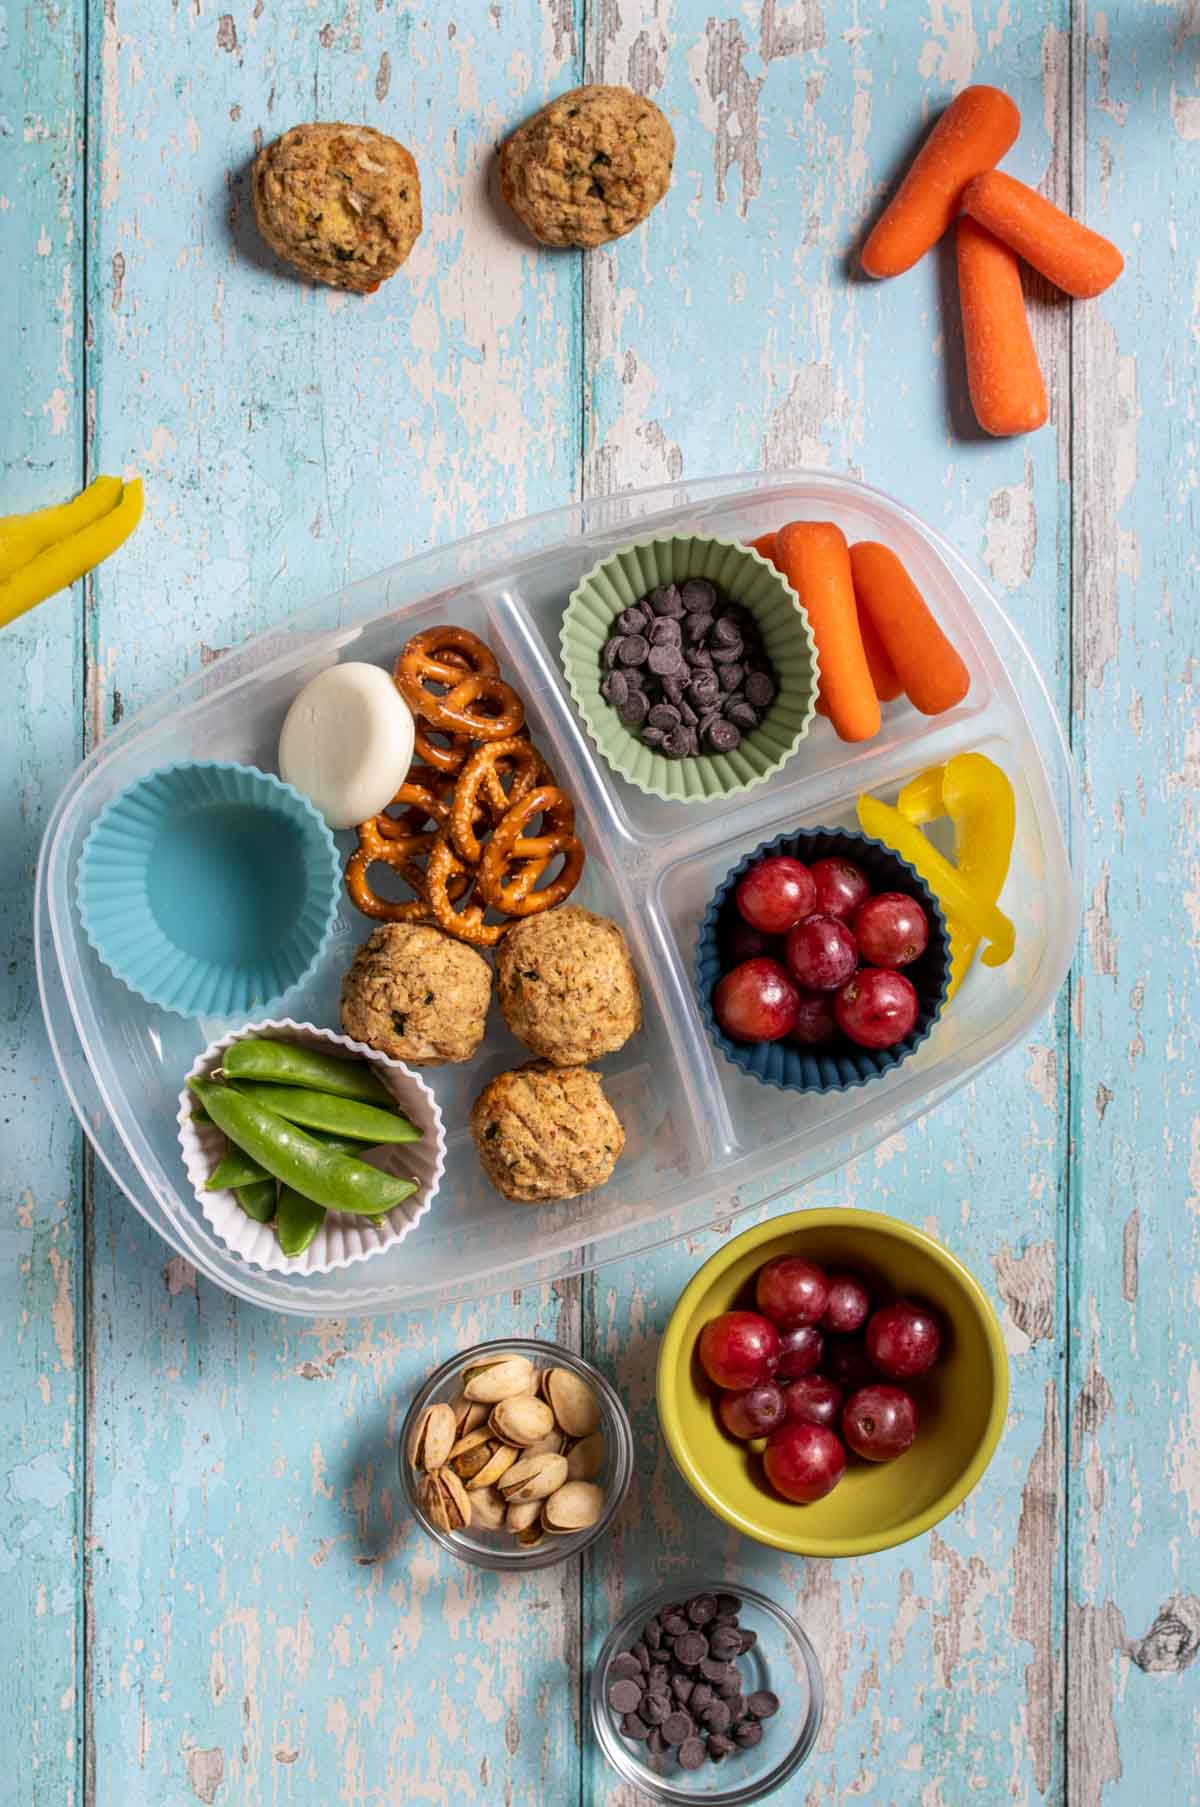 Top view of a homemade lunchable in a plastic sectioned container with fruit, veggies, chocolate chips, pretzels, nuts and protein balls.